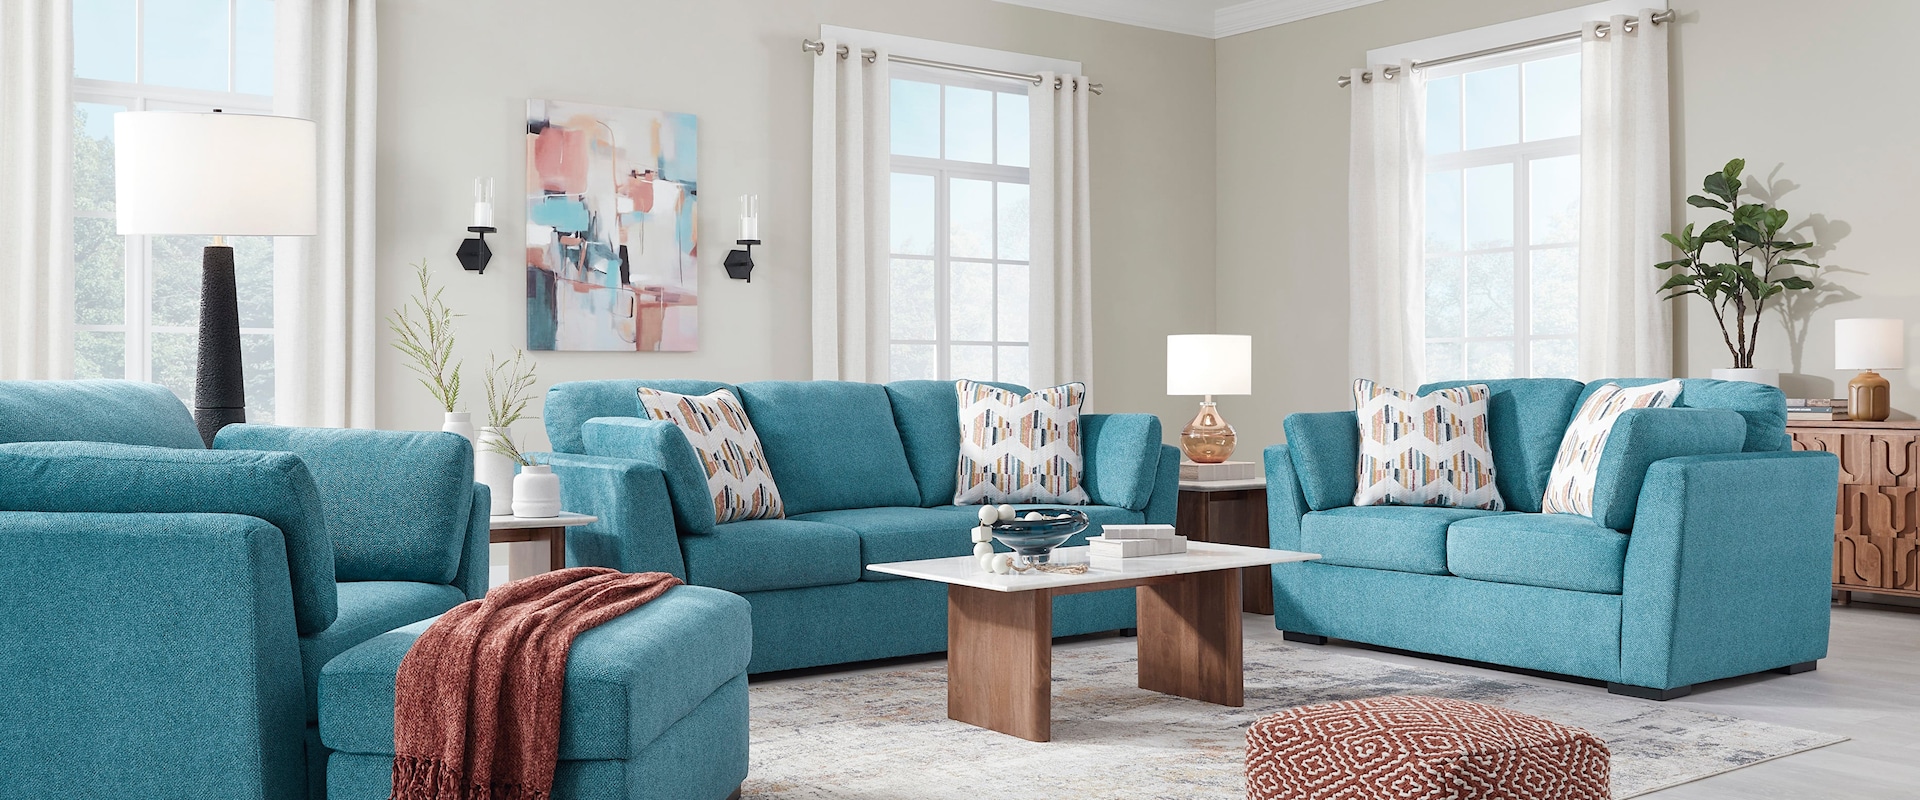 Sofa, Loveseat, Oversized Chair And Ottoman